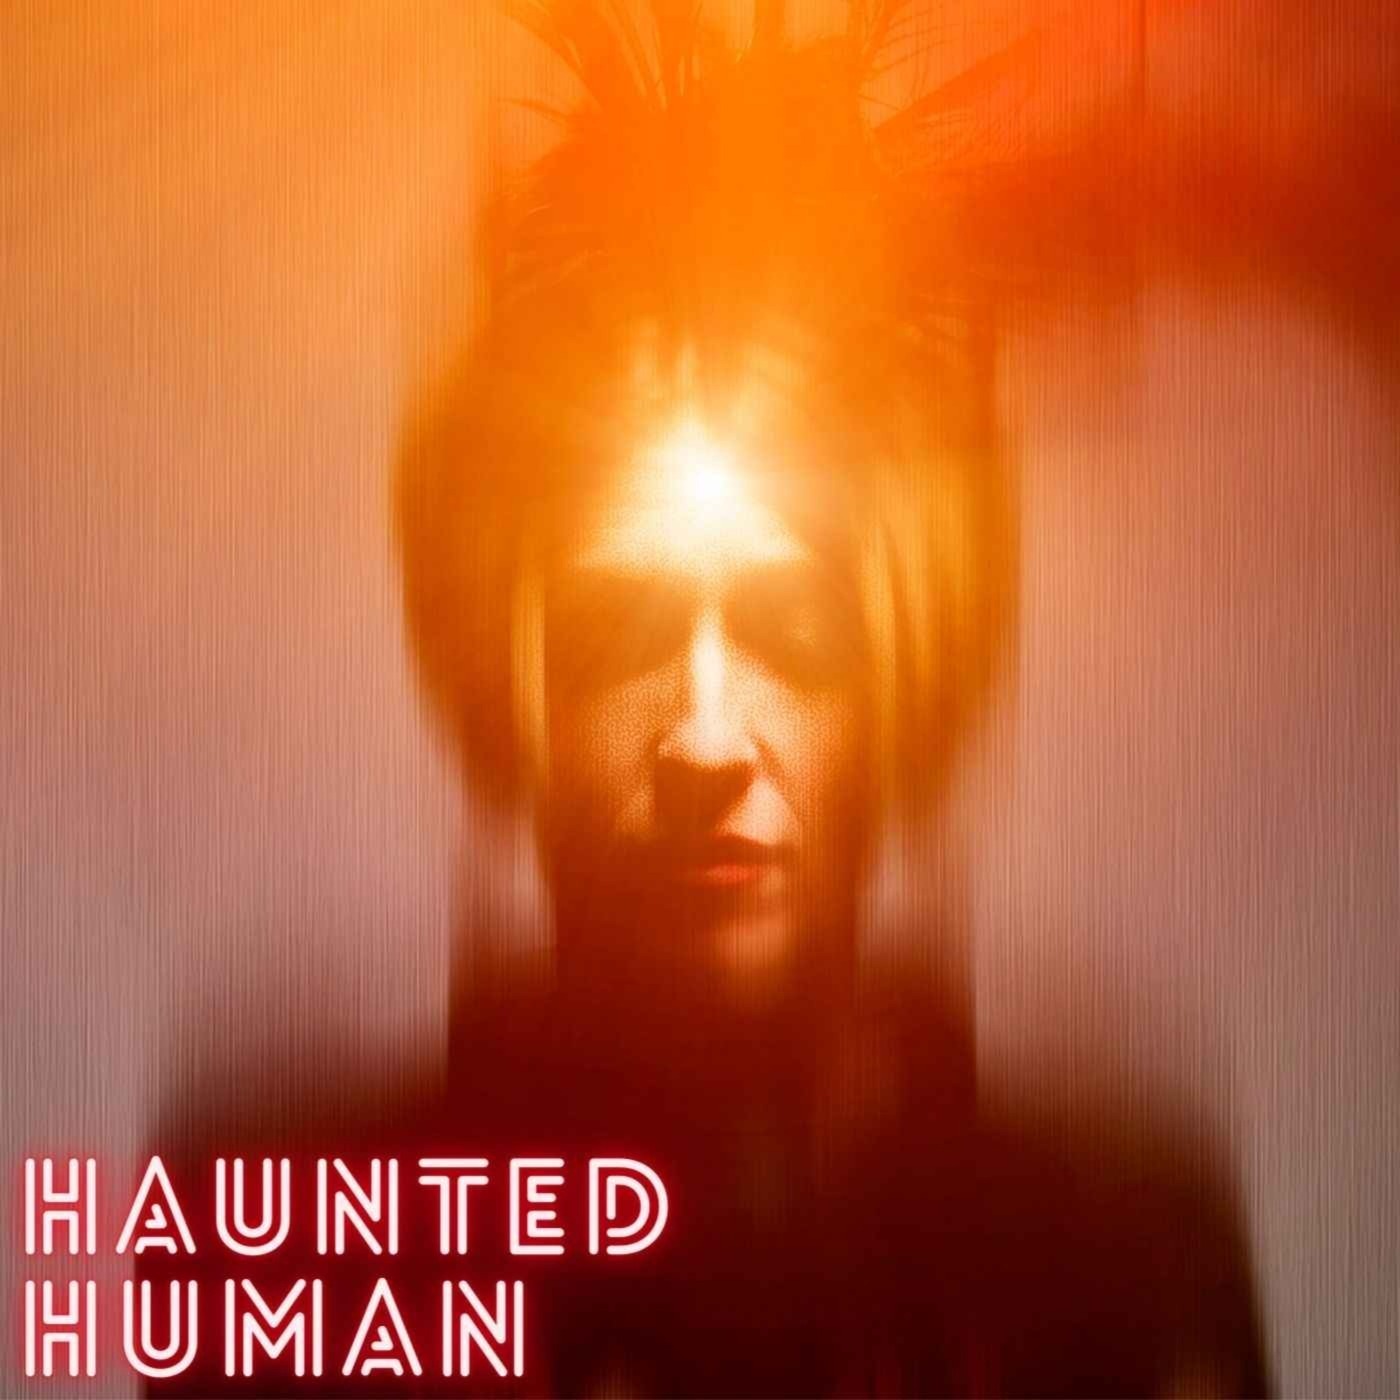 Ep. #535: HAUNTED HUMAN w/ Dr. Brian Laythe